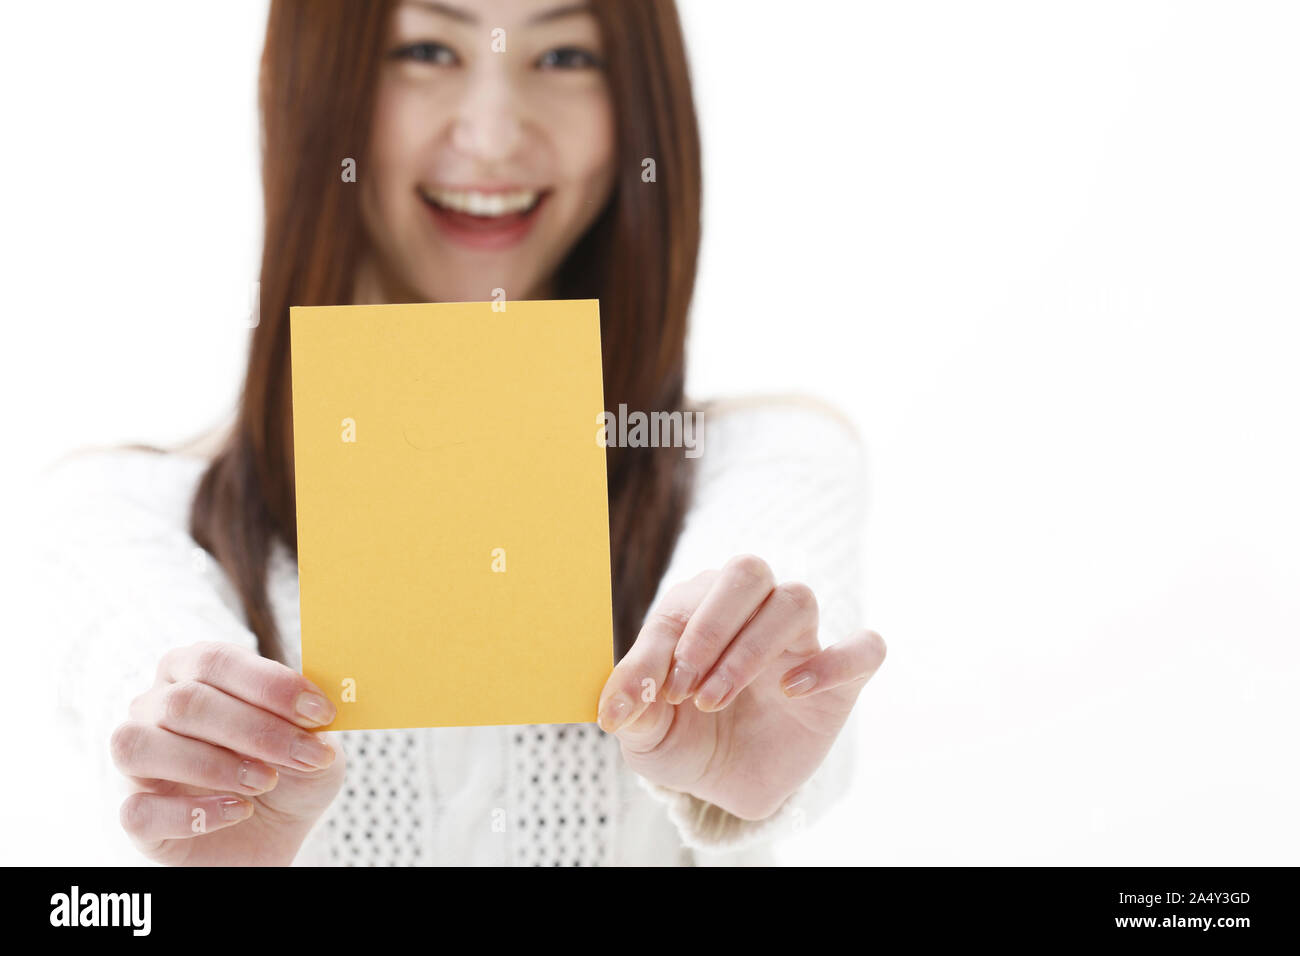 a smiling young woman showing yellow card Stock Photo